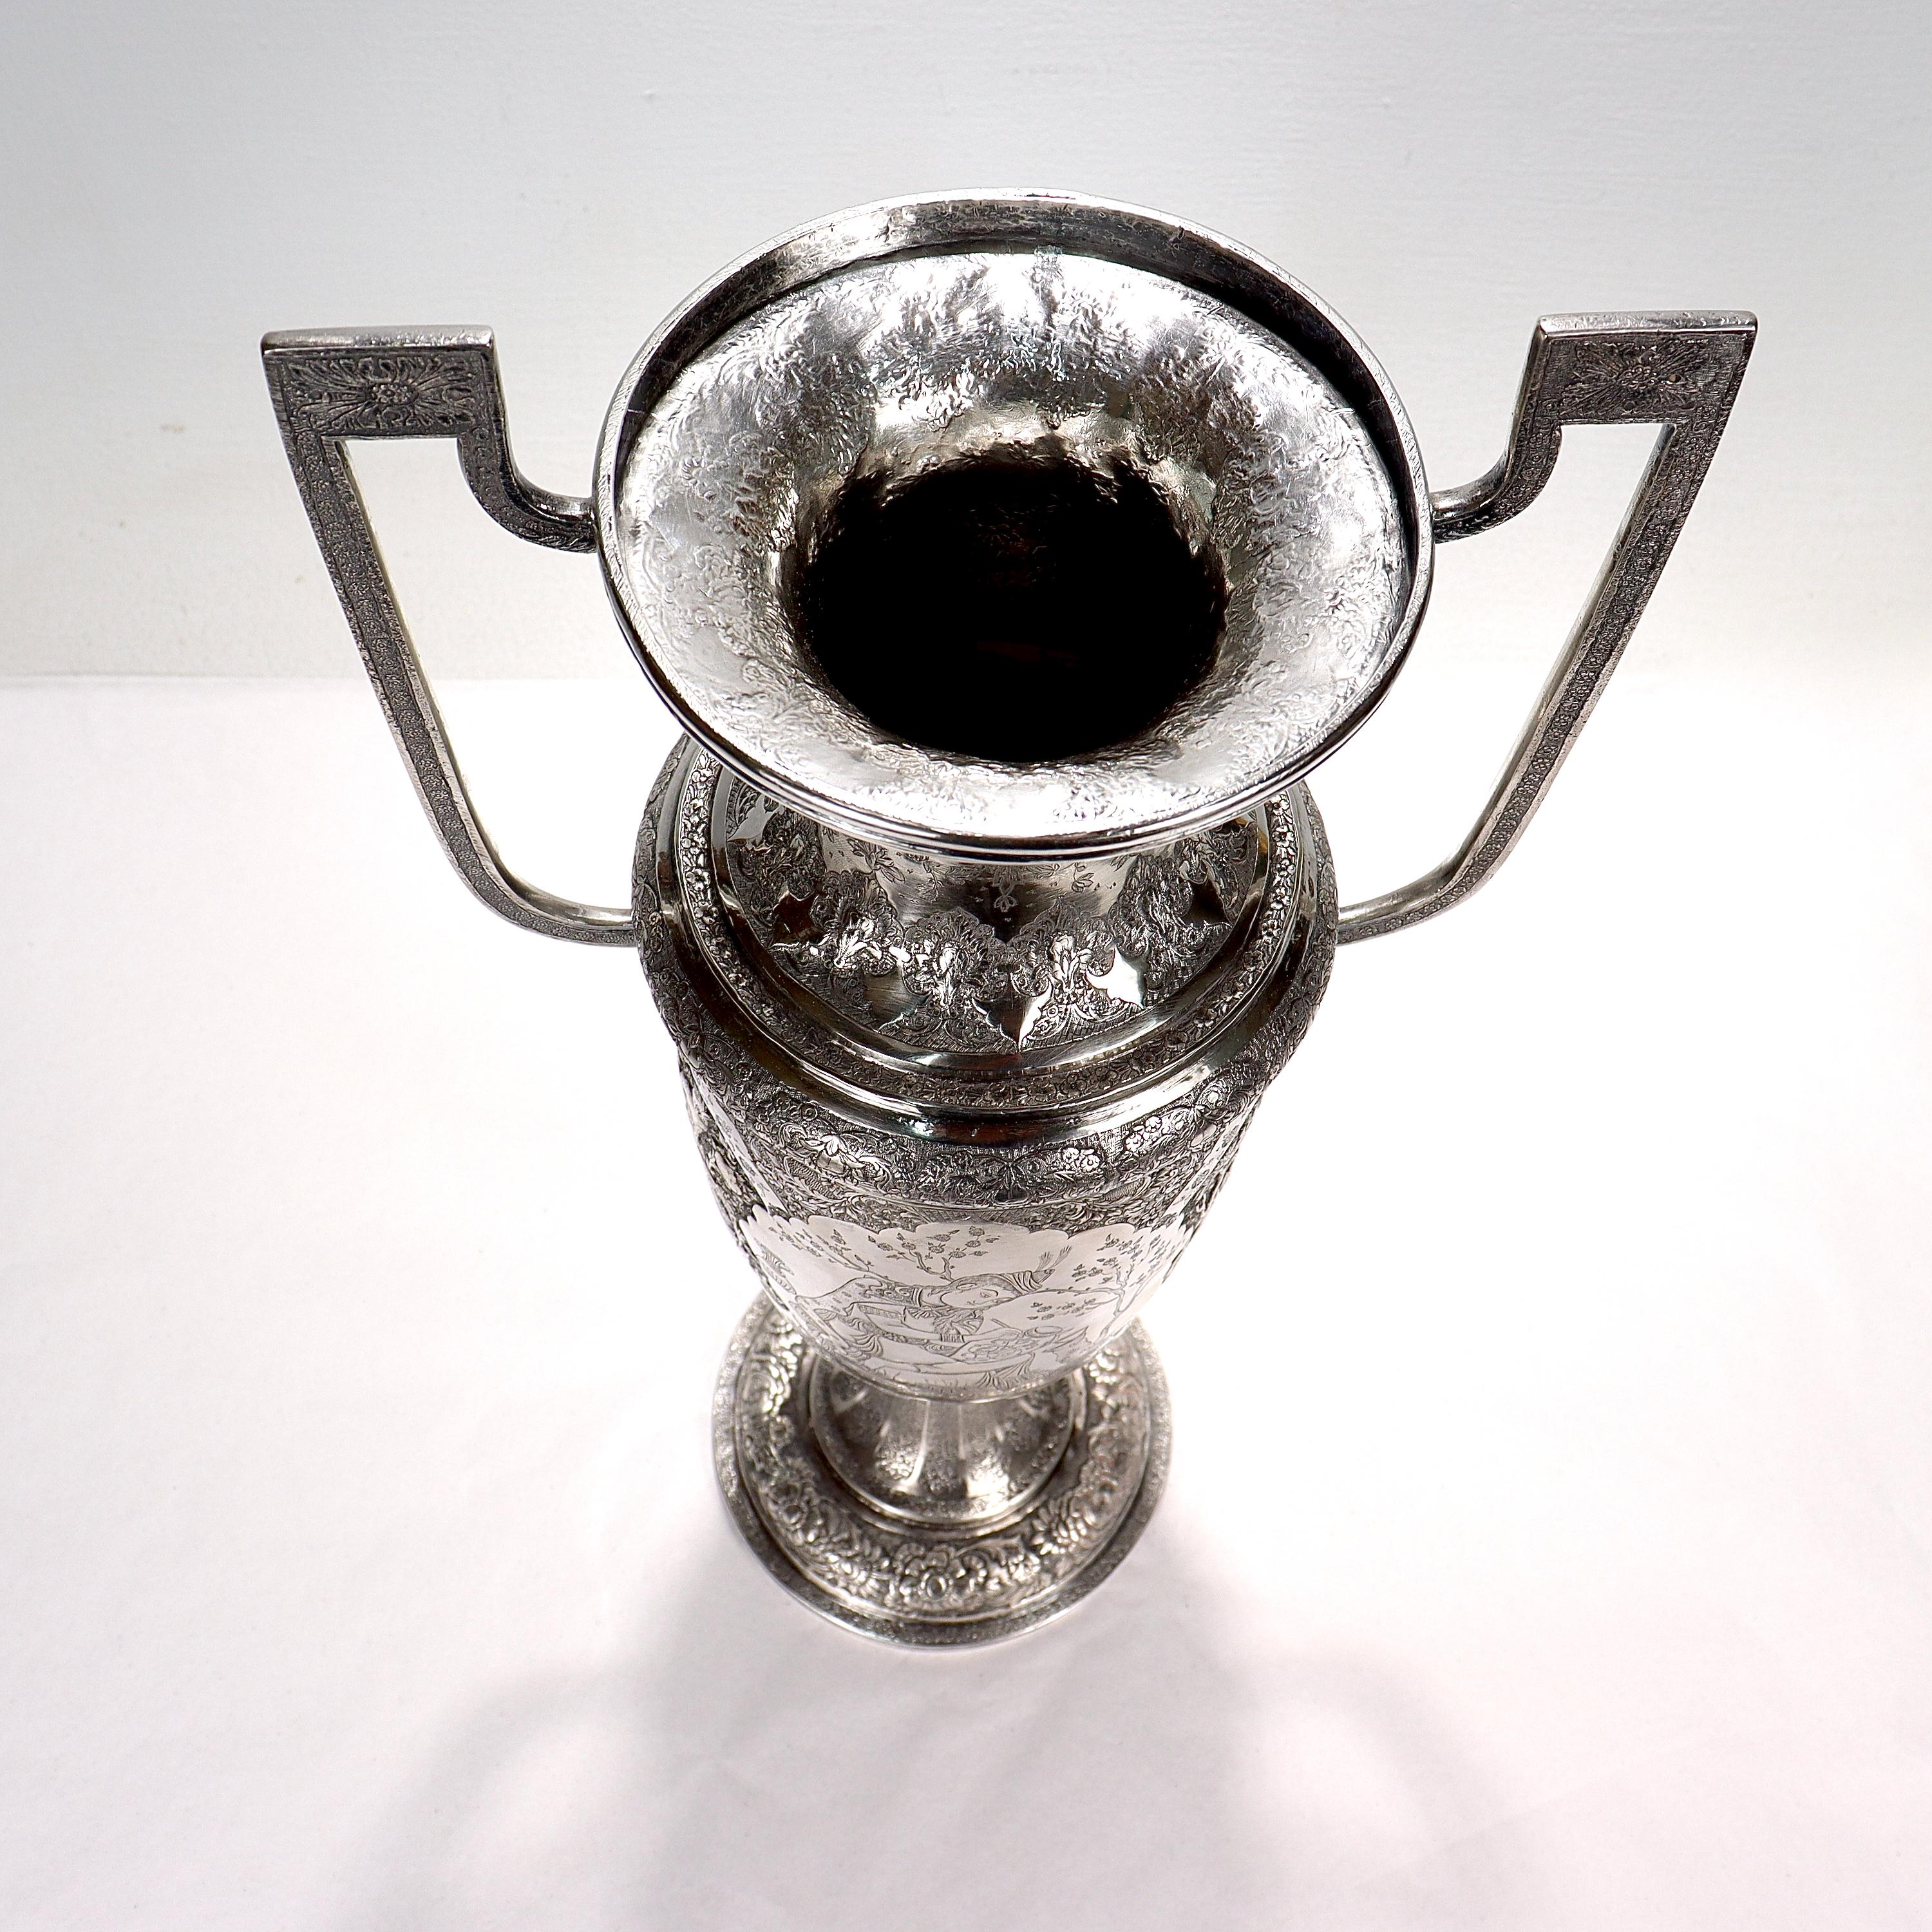 Large Twin-Handled Old or Antique Islamic Ottoman / Persian Repoussé Silver Vase For Sale 1